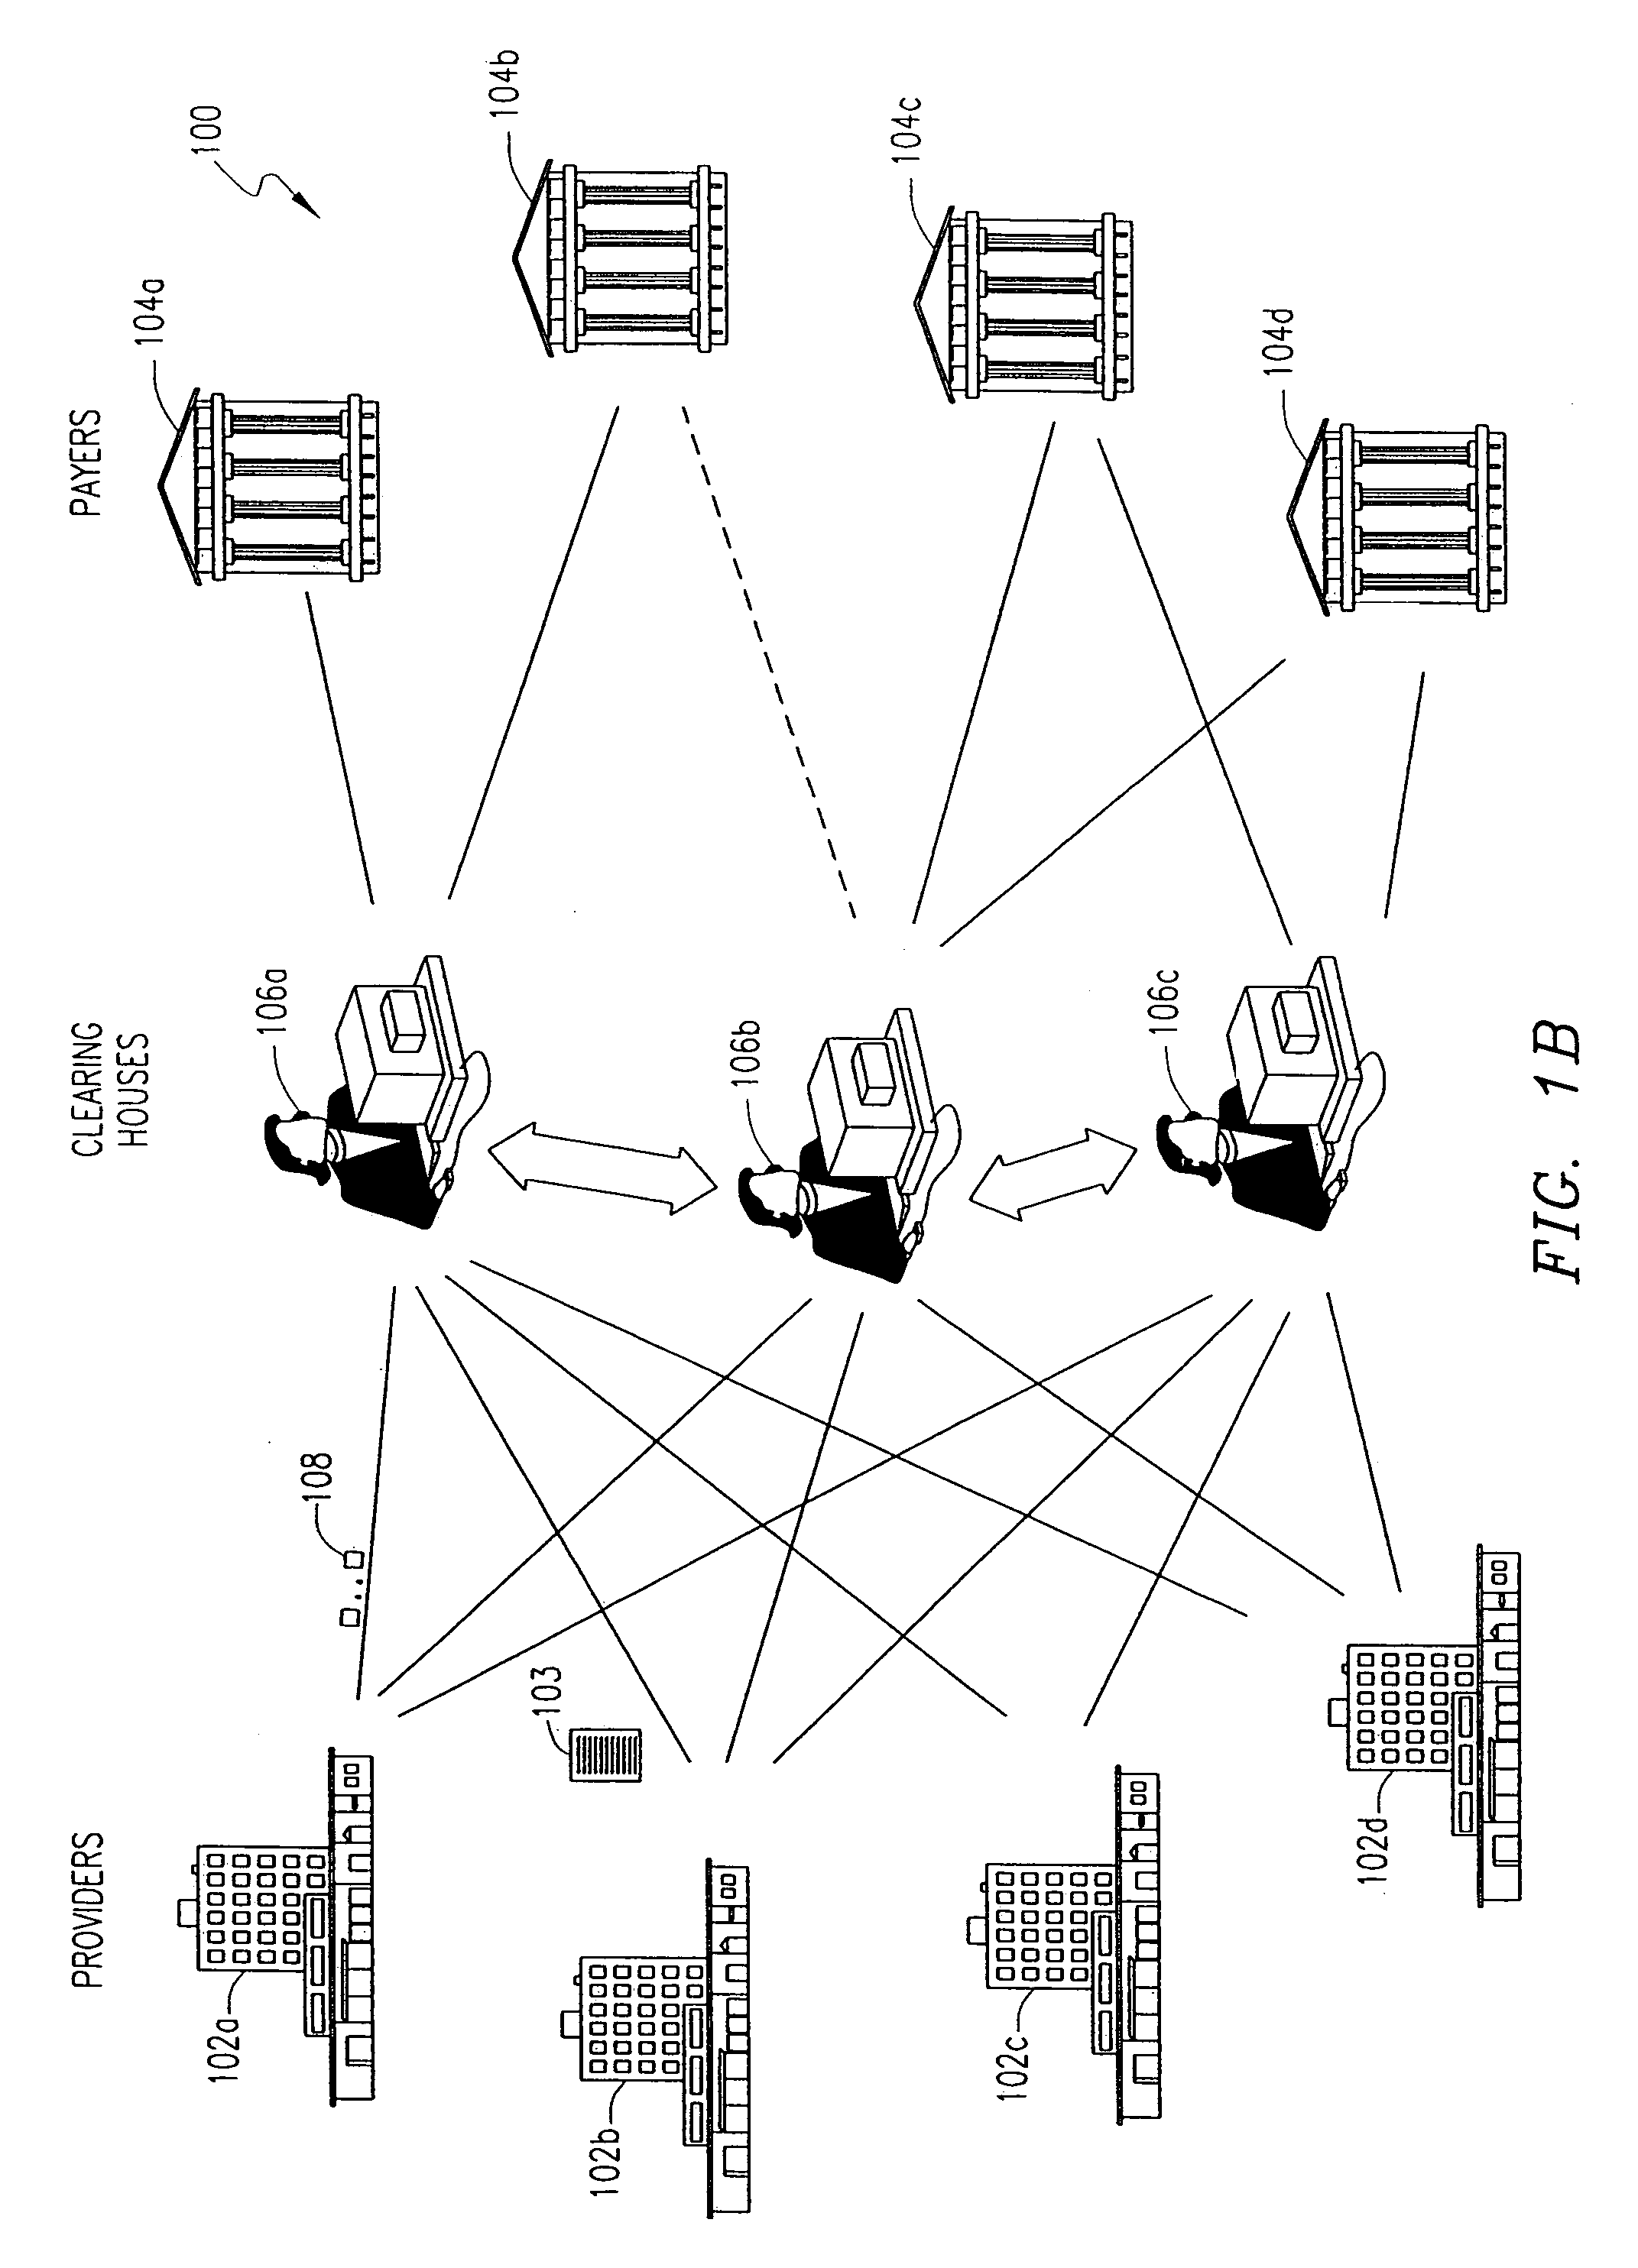 Method of and system for rules-based population of a knowledge base used for medical claims processing